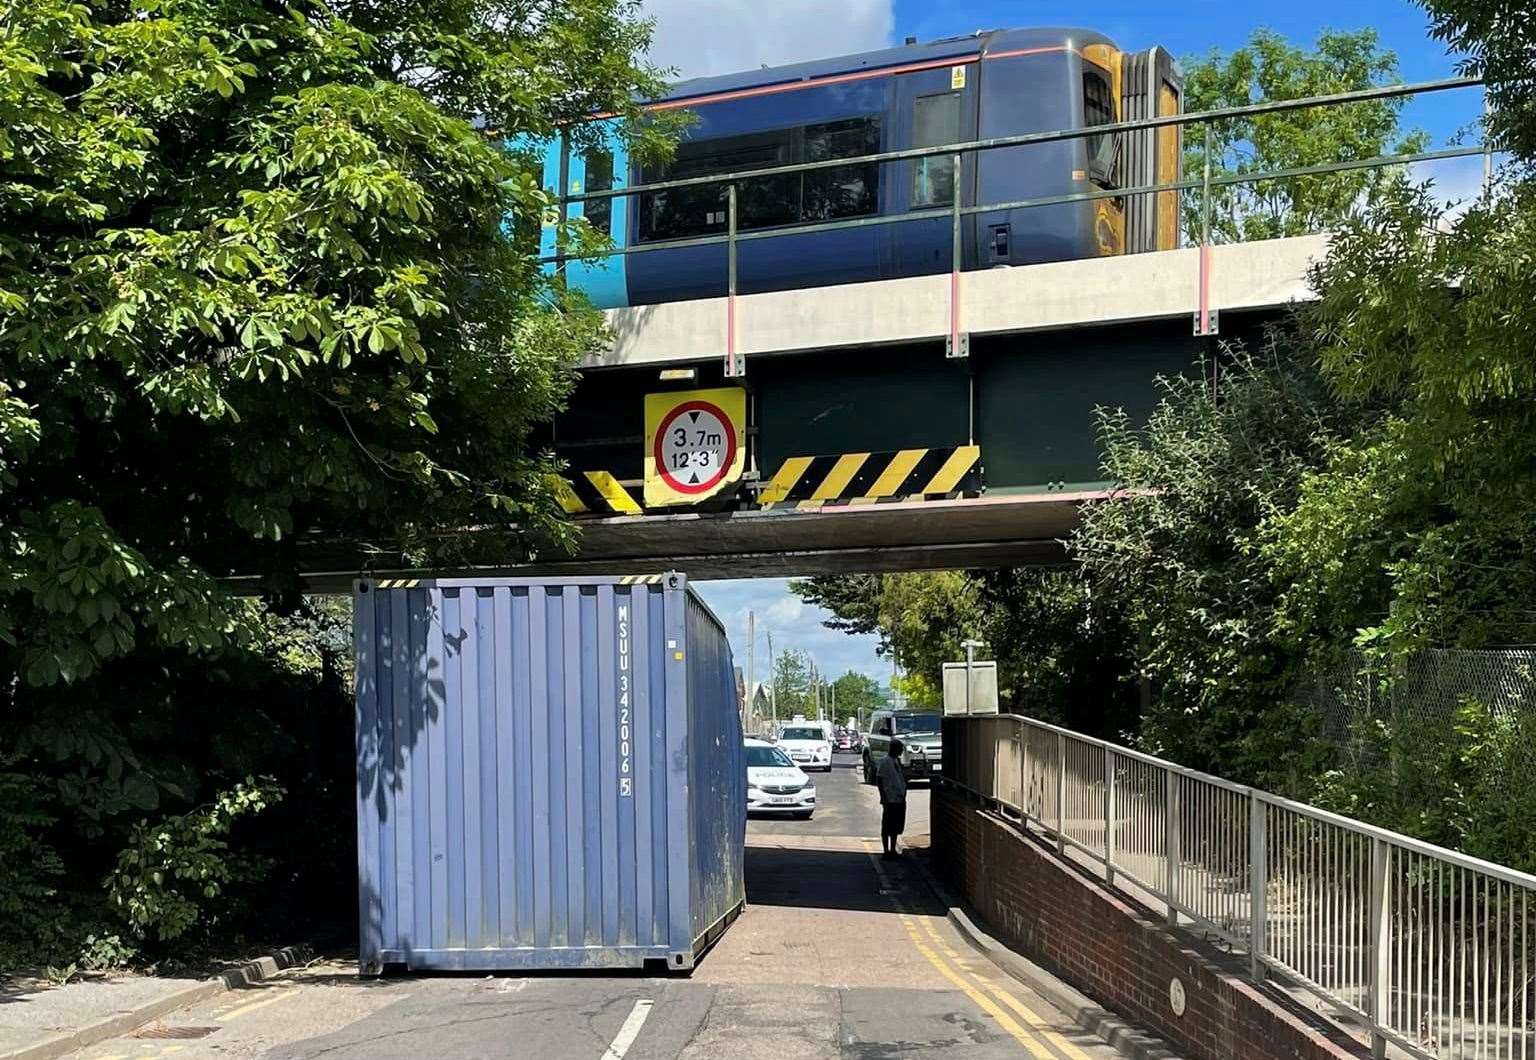 A container was knocked off the back of a lorry after it hit a railway bridge in Pattenden Lane in Marden. Picture: Marden Parish Council